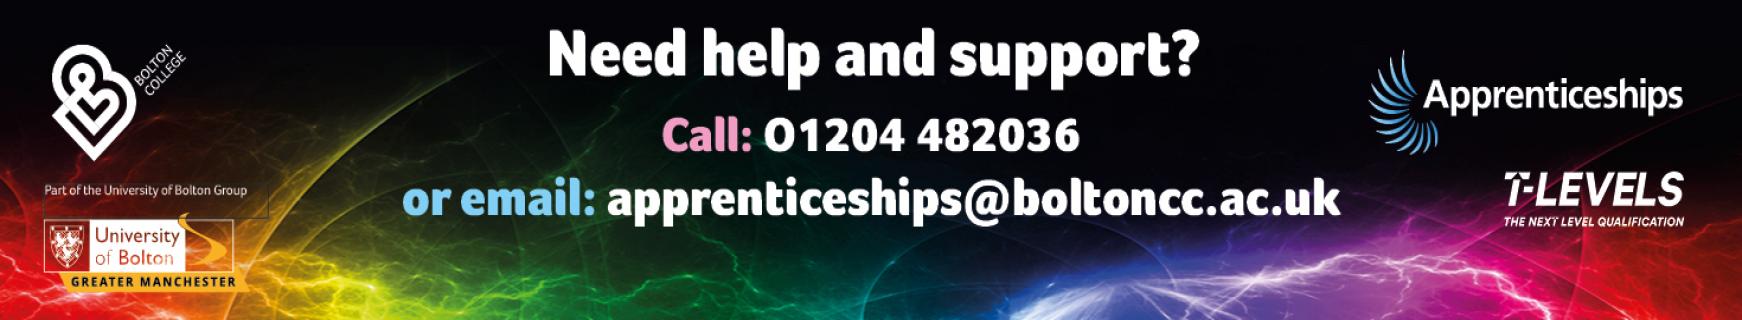 Call 01204 482036 email: apprenticeships@boltoncc.ac.uk for apprentice support